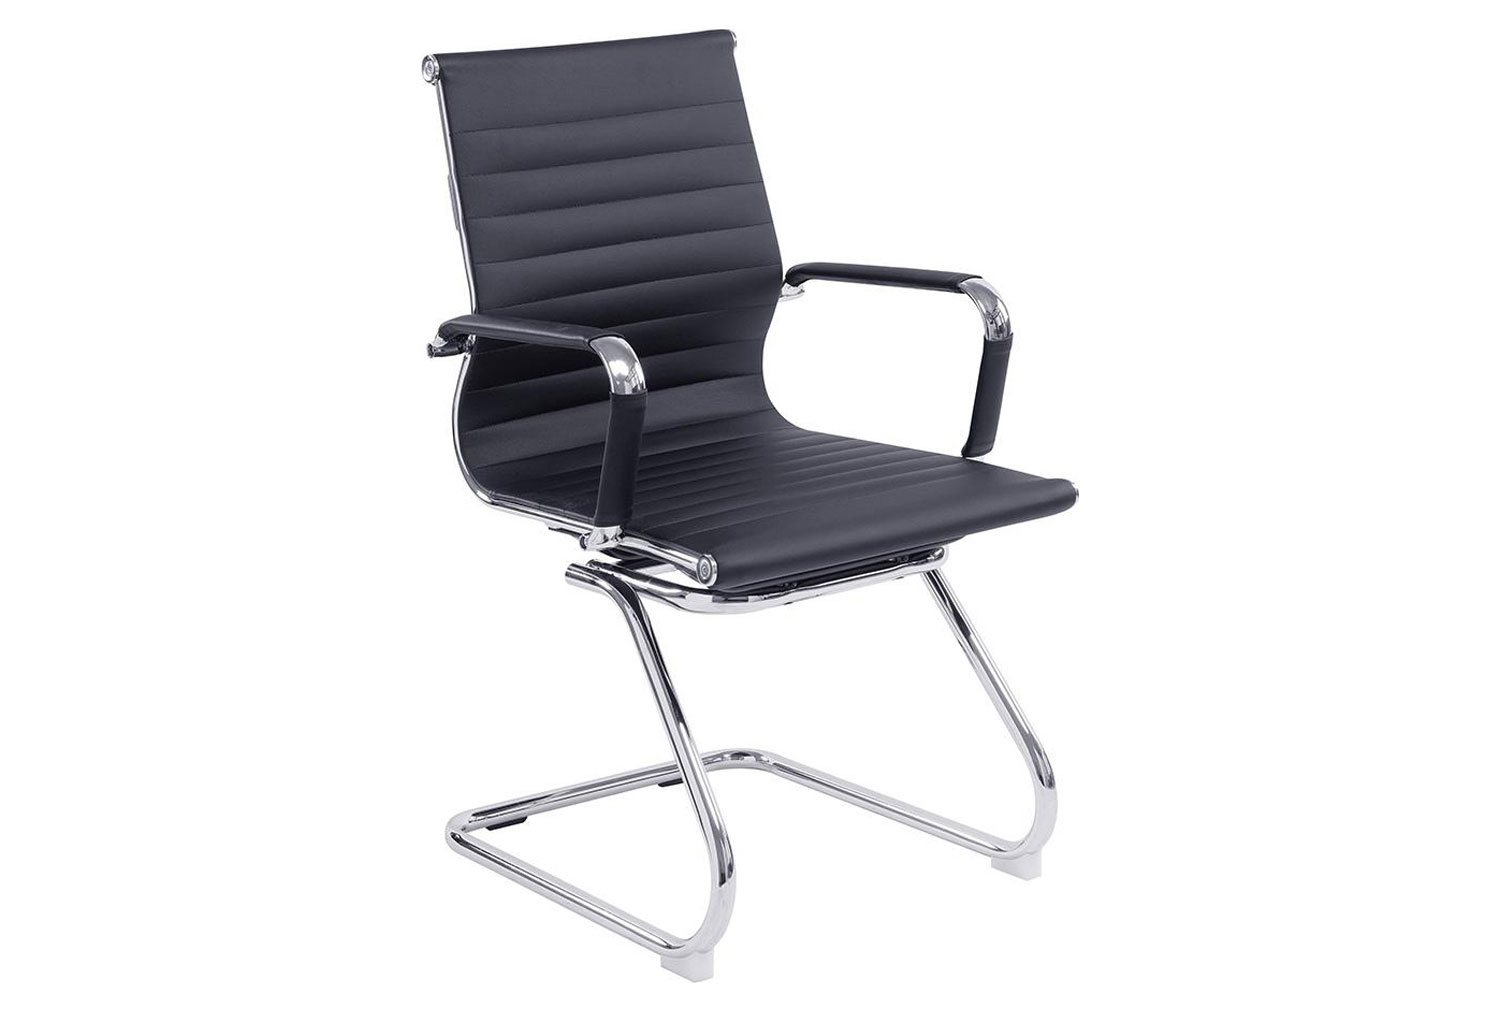 Andruzzi Black Bonded Leather Visitor Office Chair, Black, Express Delivery